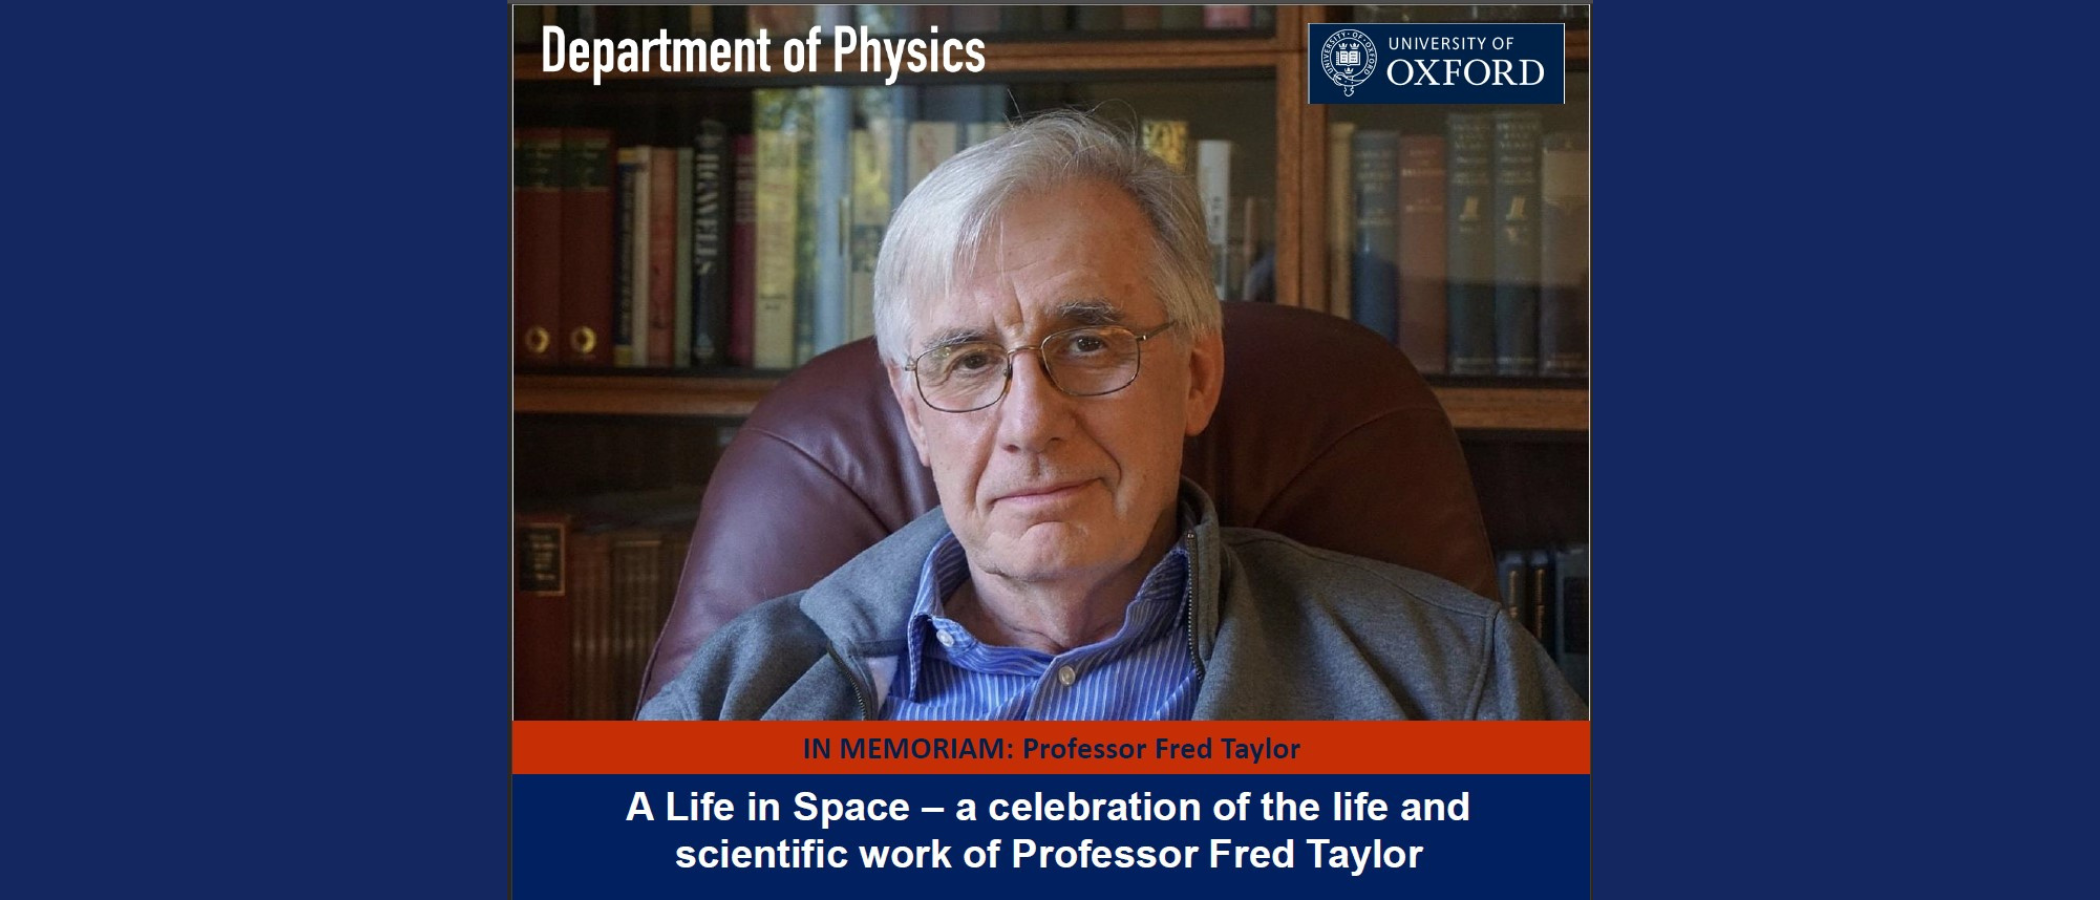 Photo of Prof Fred Taylor with wording: IN MEMORIAM: Professor Fred Taylor  A Life in Space – a celebration of the life and scientific work of Professor Fred Taylor